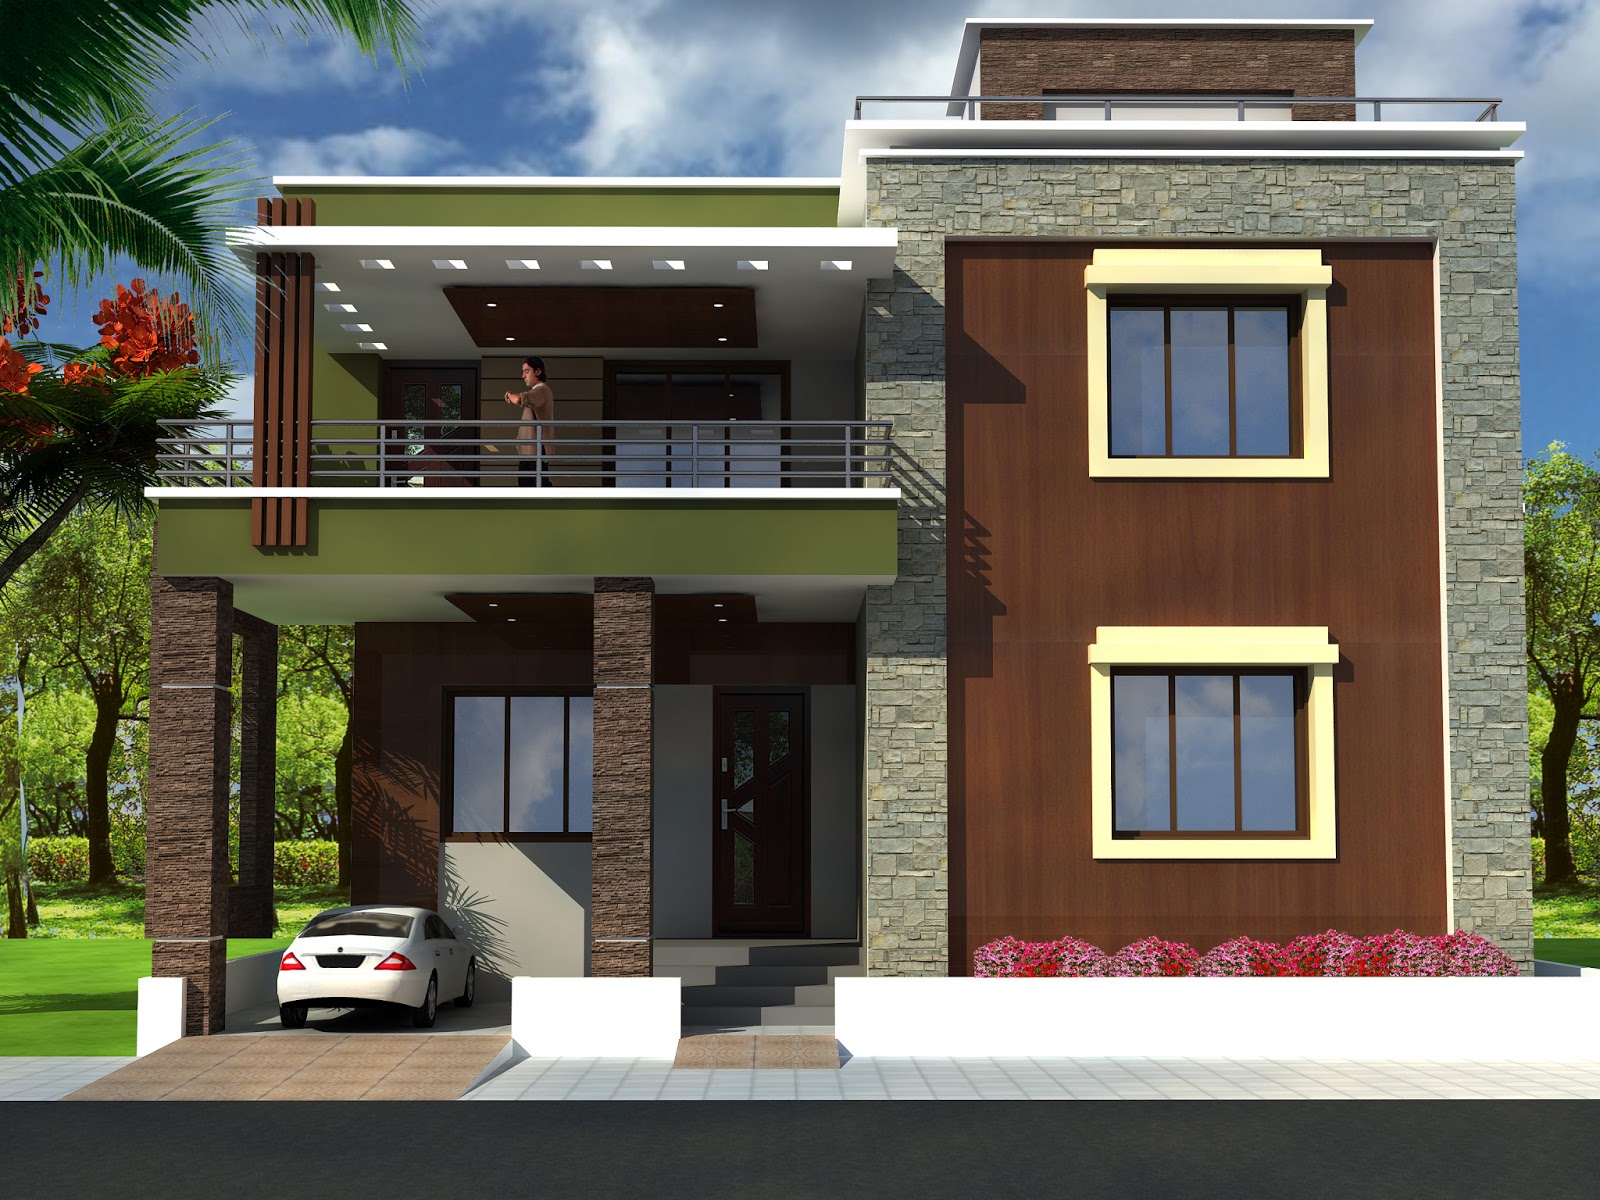 Design Of Small House Front View Modern Design